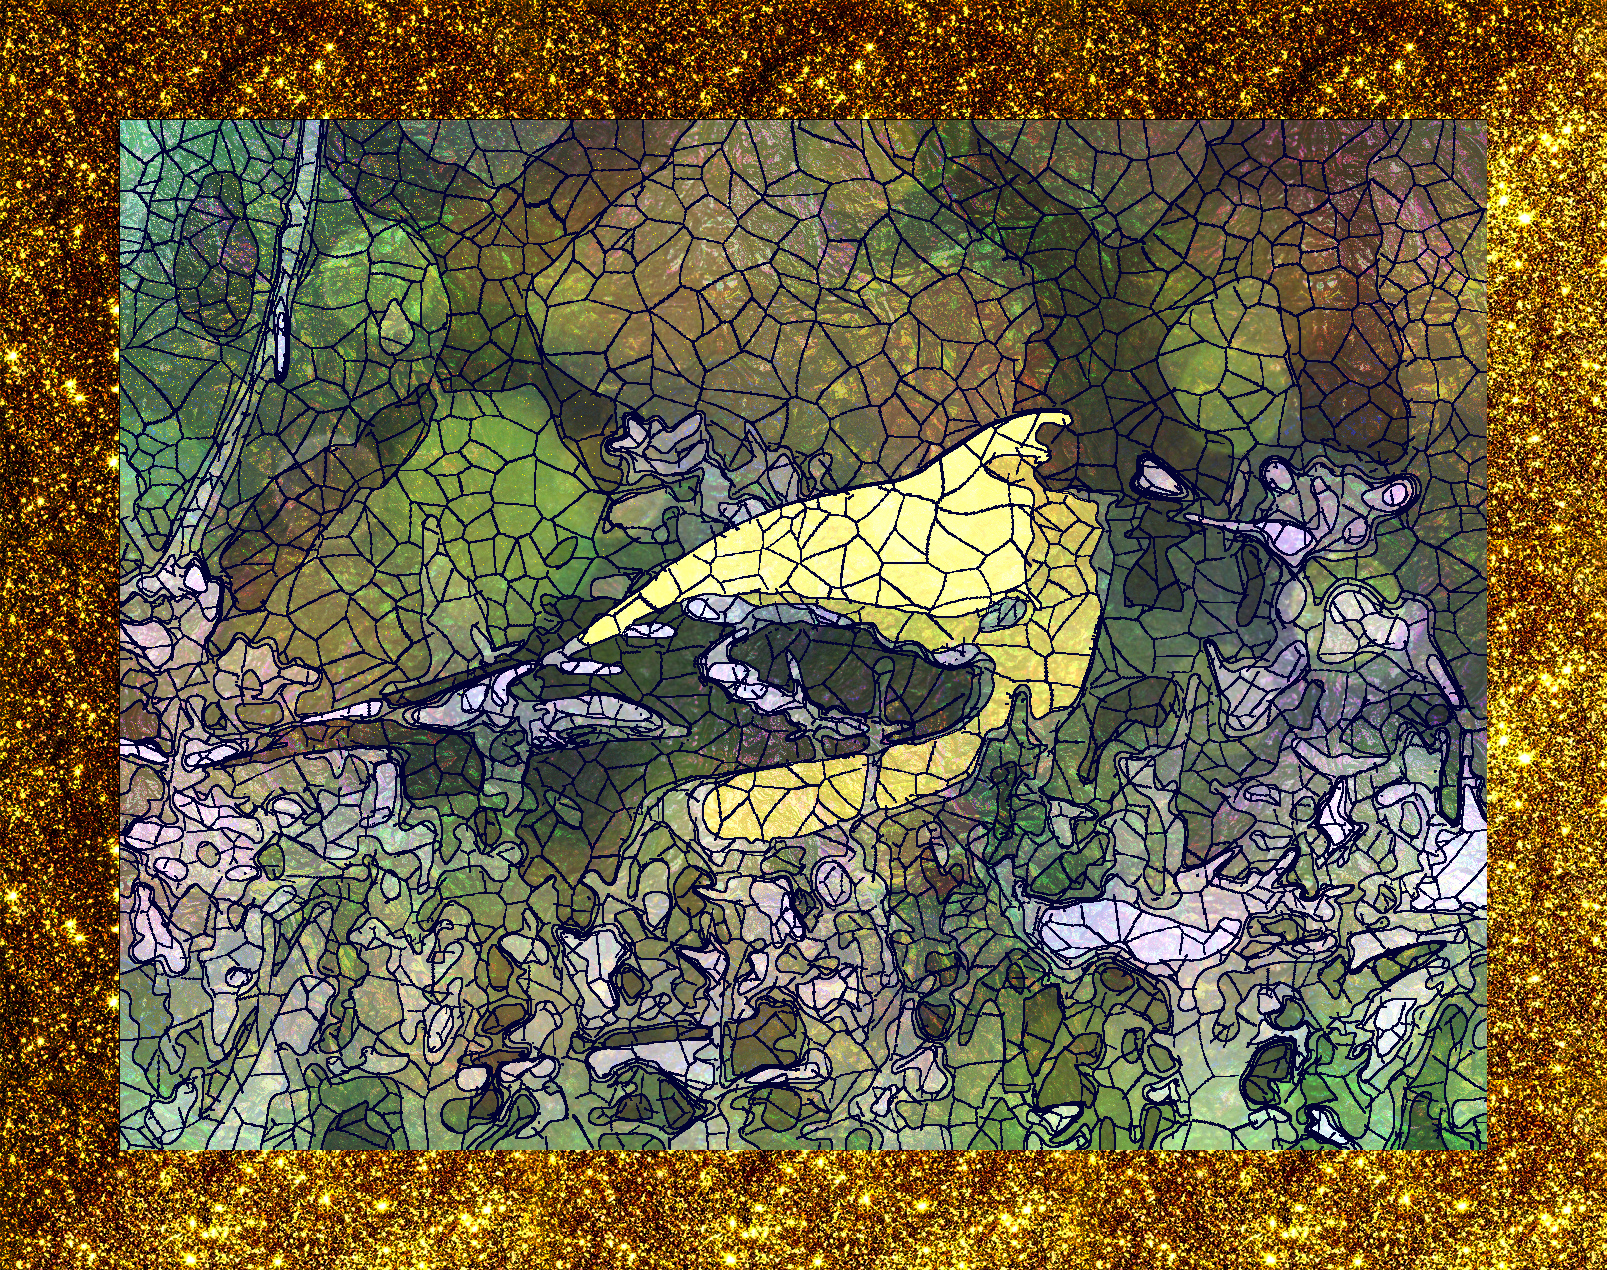 2020-04-30 16-57-54 yellow-bird as a stained glass mosaic.jpg